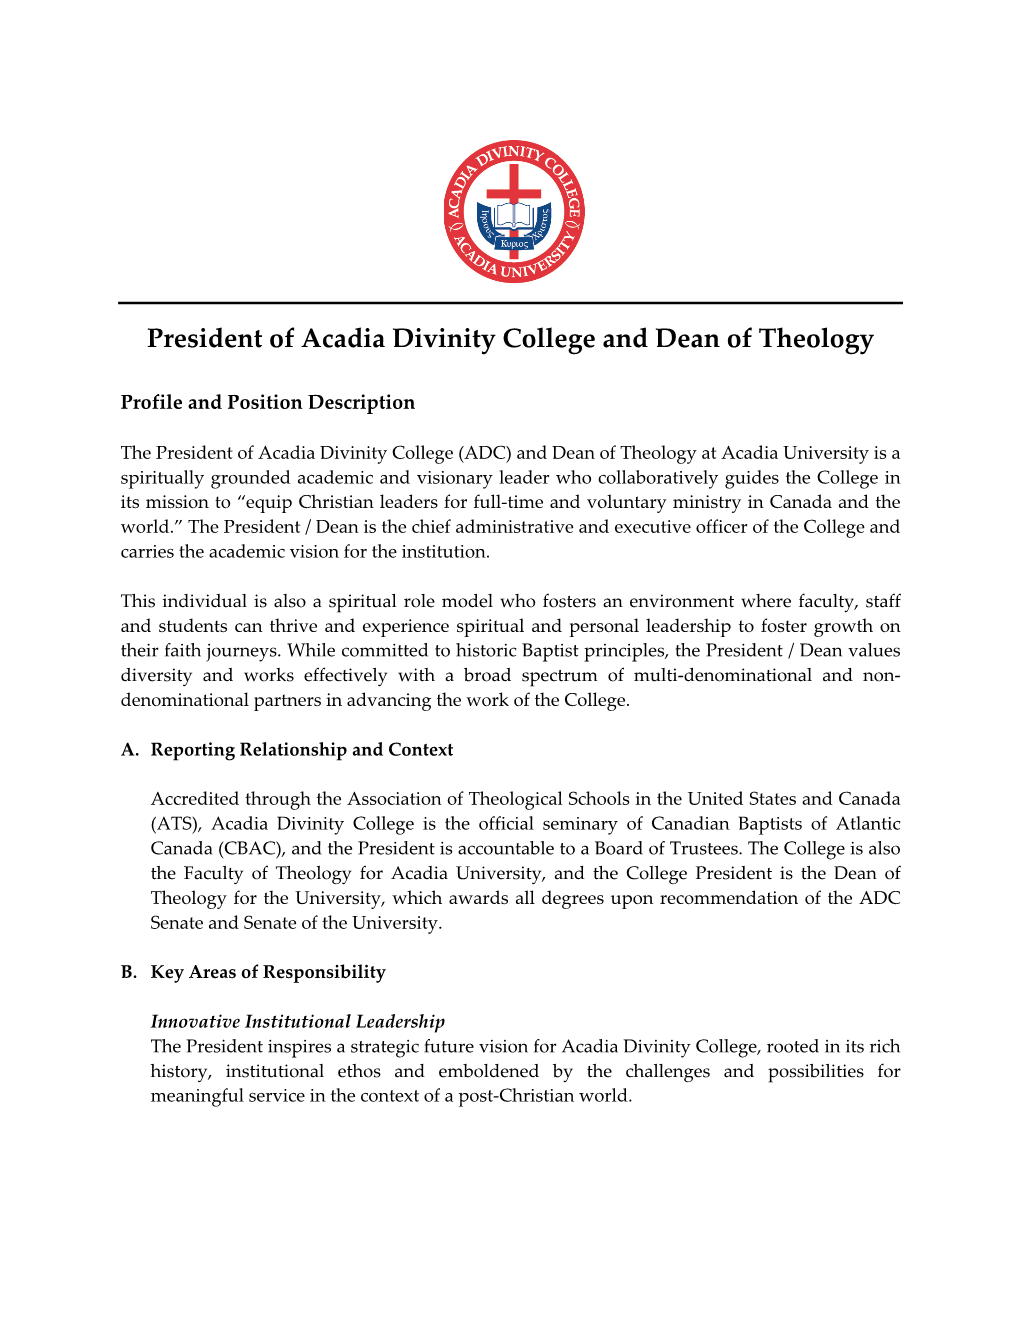 President of Acadia Divinity College and Dean of Theology